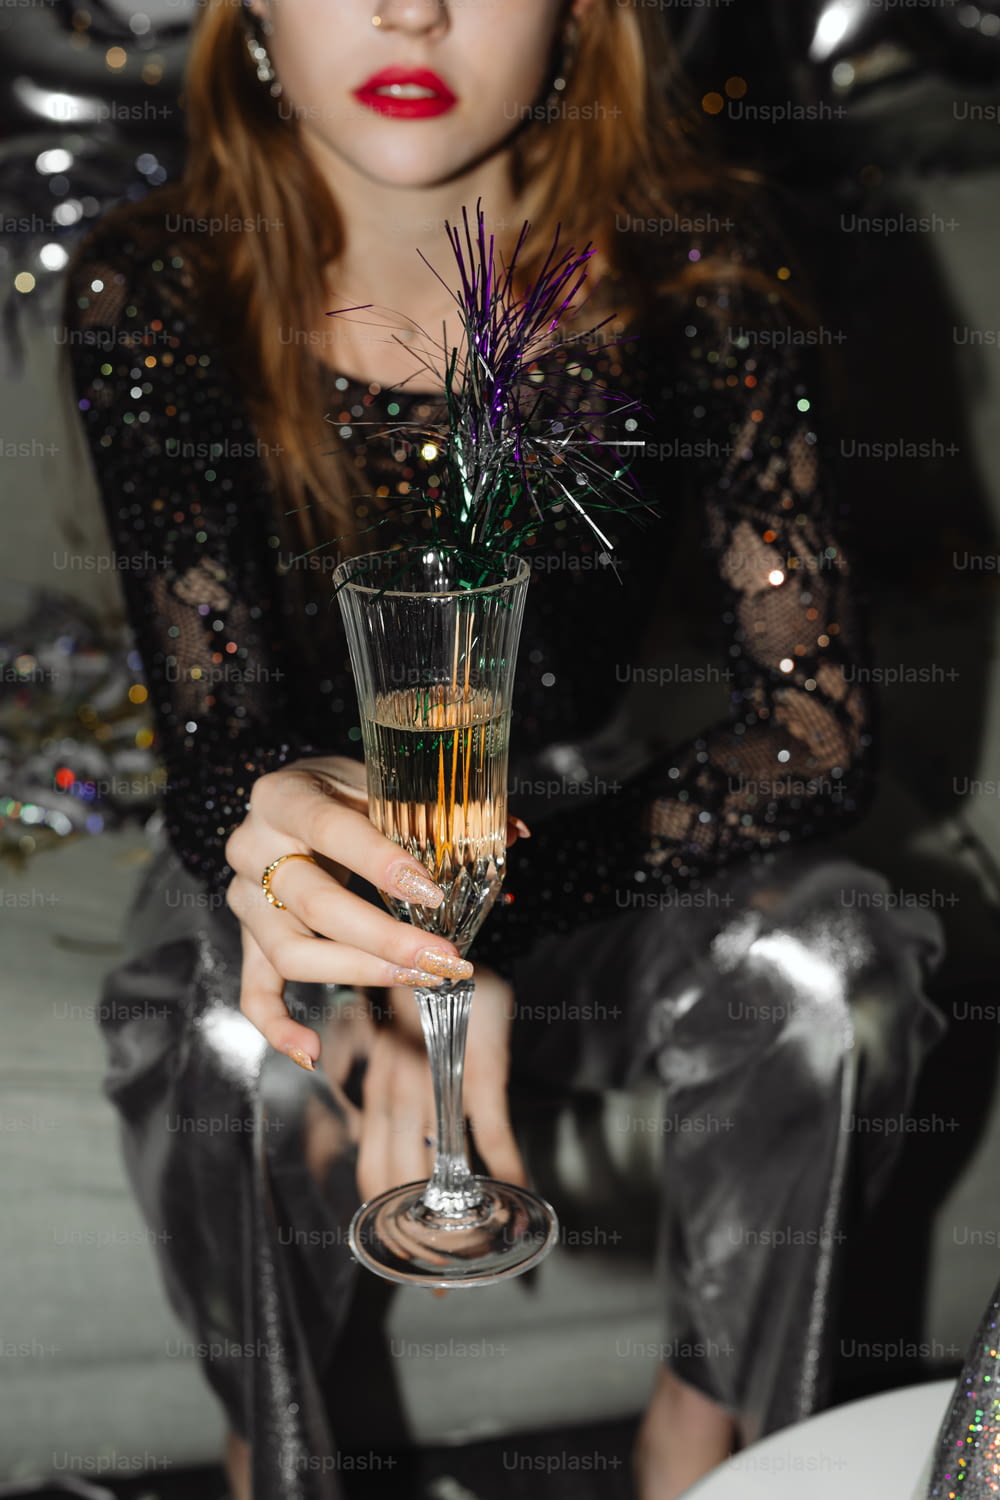 a woman sitting on a couch holding a wine glass